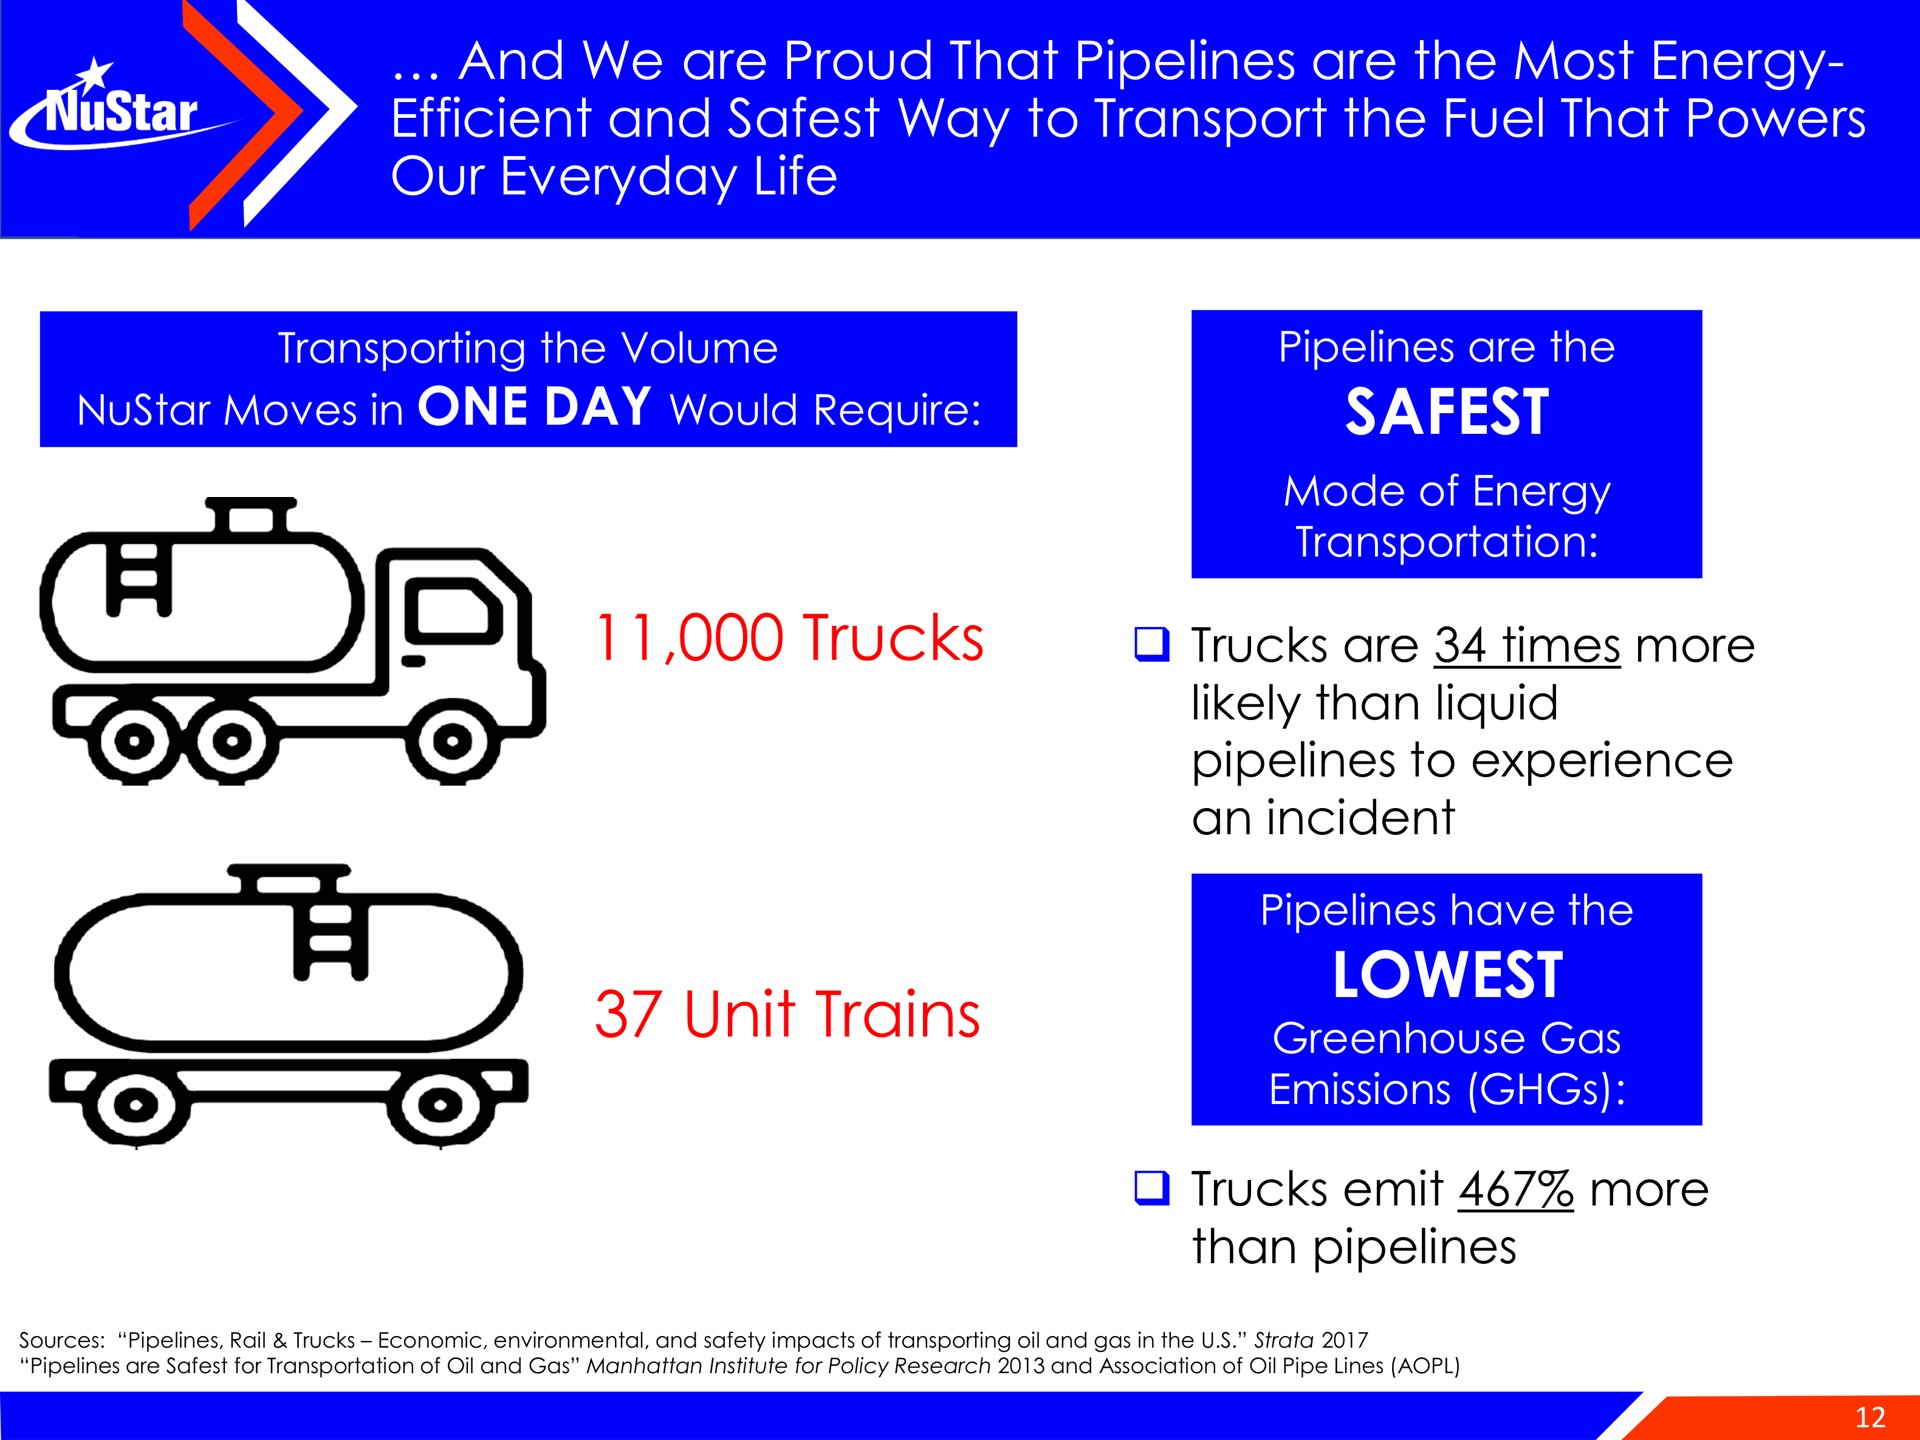 and we are that pipelines are the most energy efficient and way to transport the fuel that powers our everyday life trucks trucks are times more unit trains likely than liquid pipelines to experience an incident trucks emit more than pipelines moves in one day would a greenhouse gas | NuStar Energy